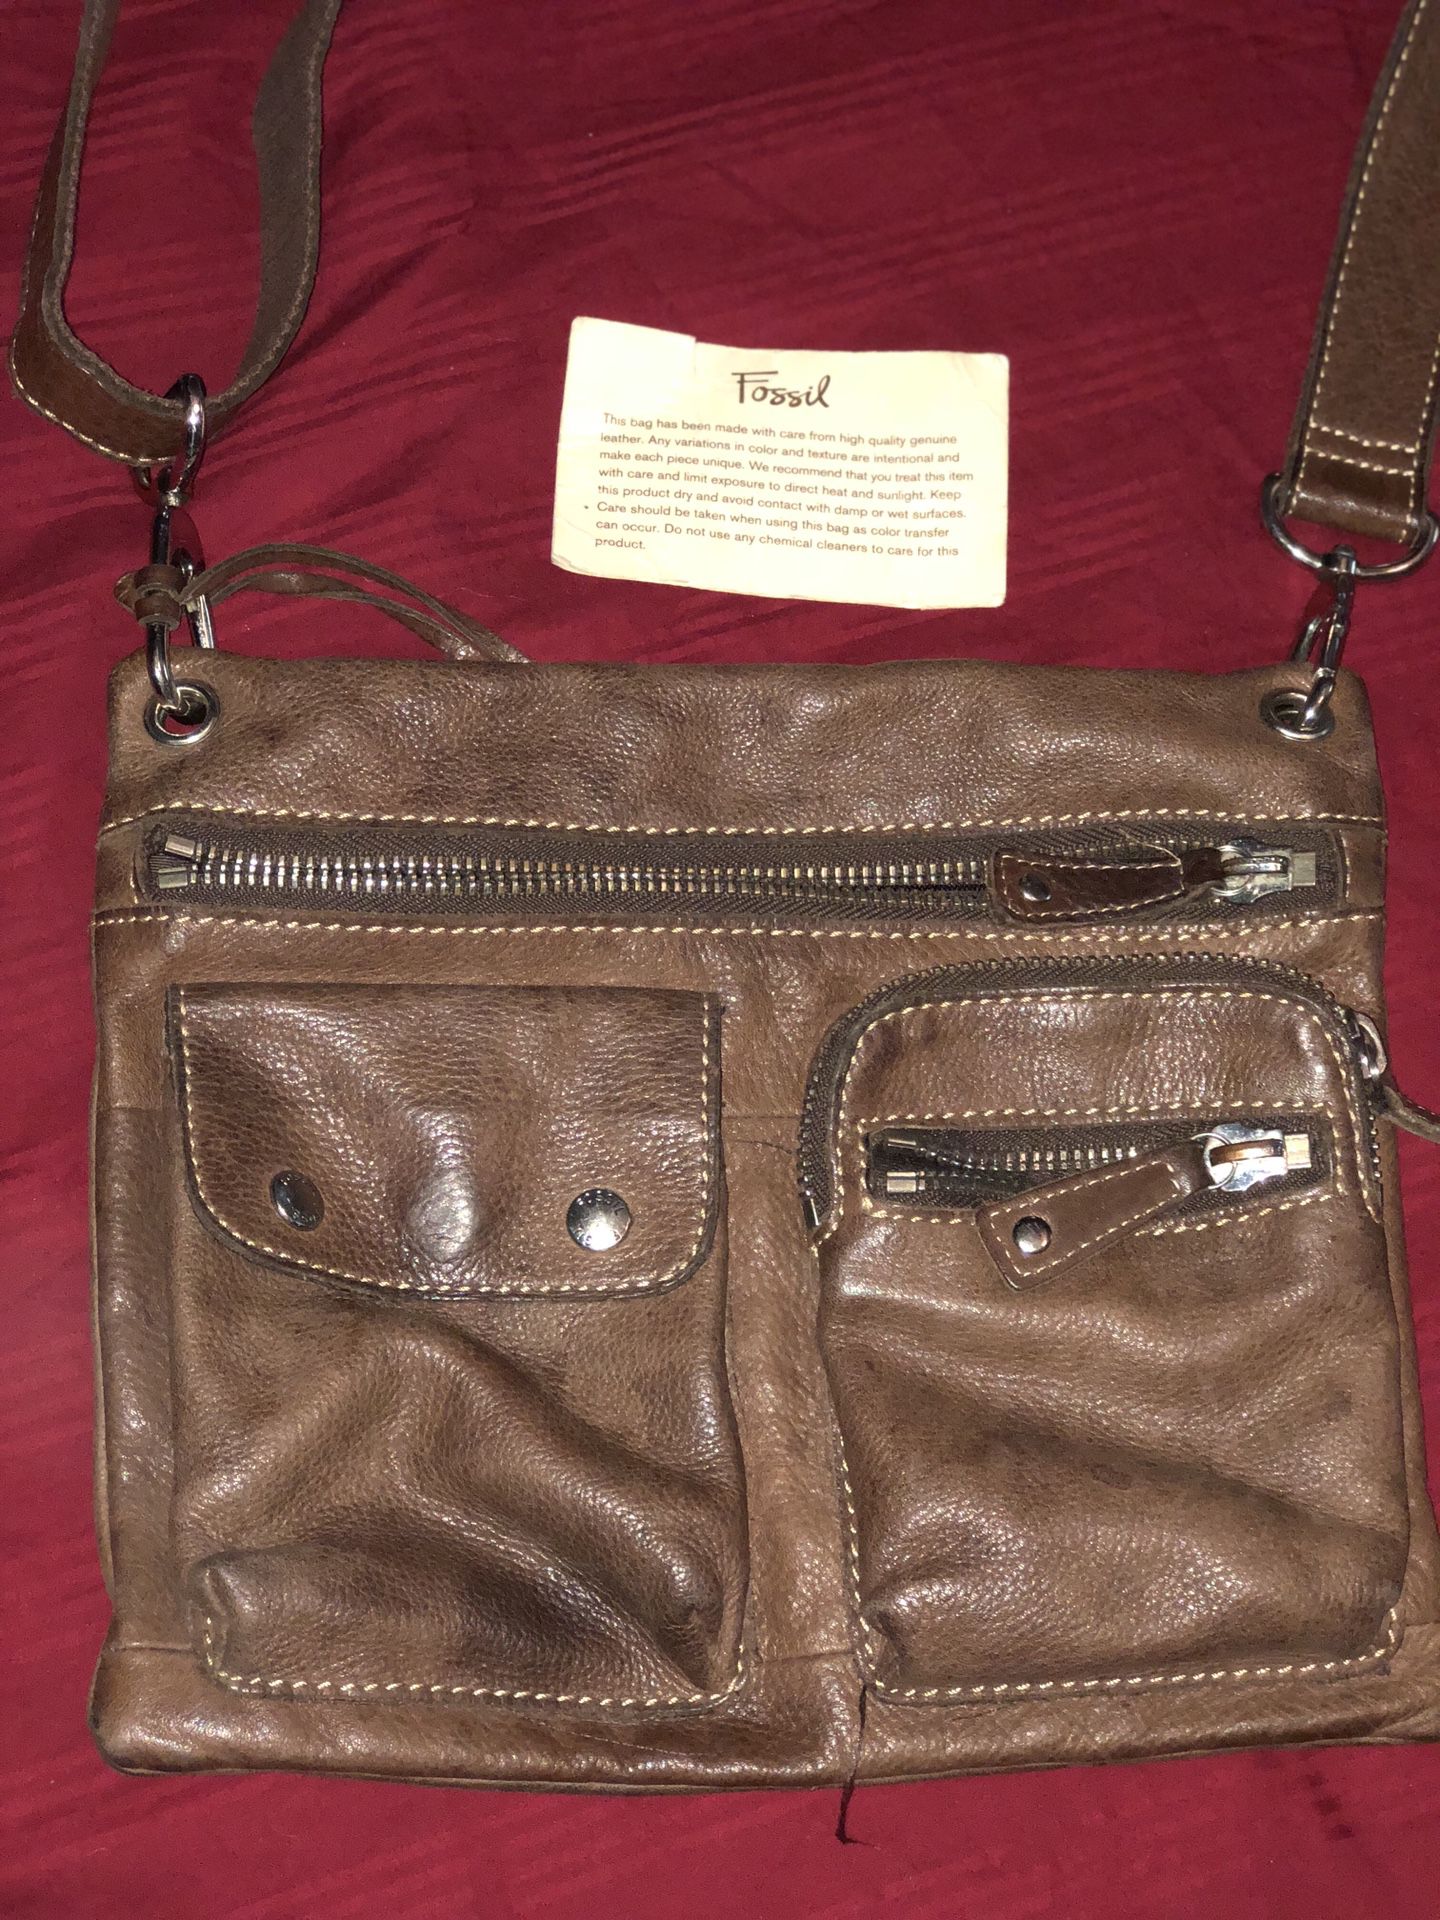 FOSSIL MESSENGER BAG. Same as the one in Hangover. Brown leather